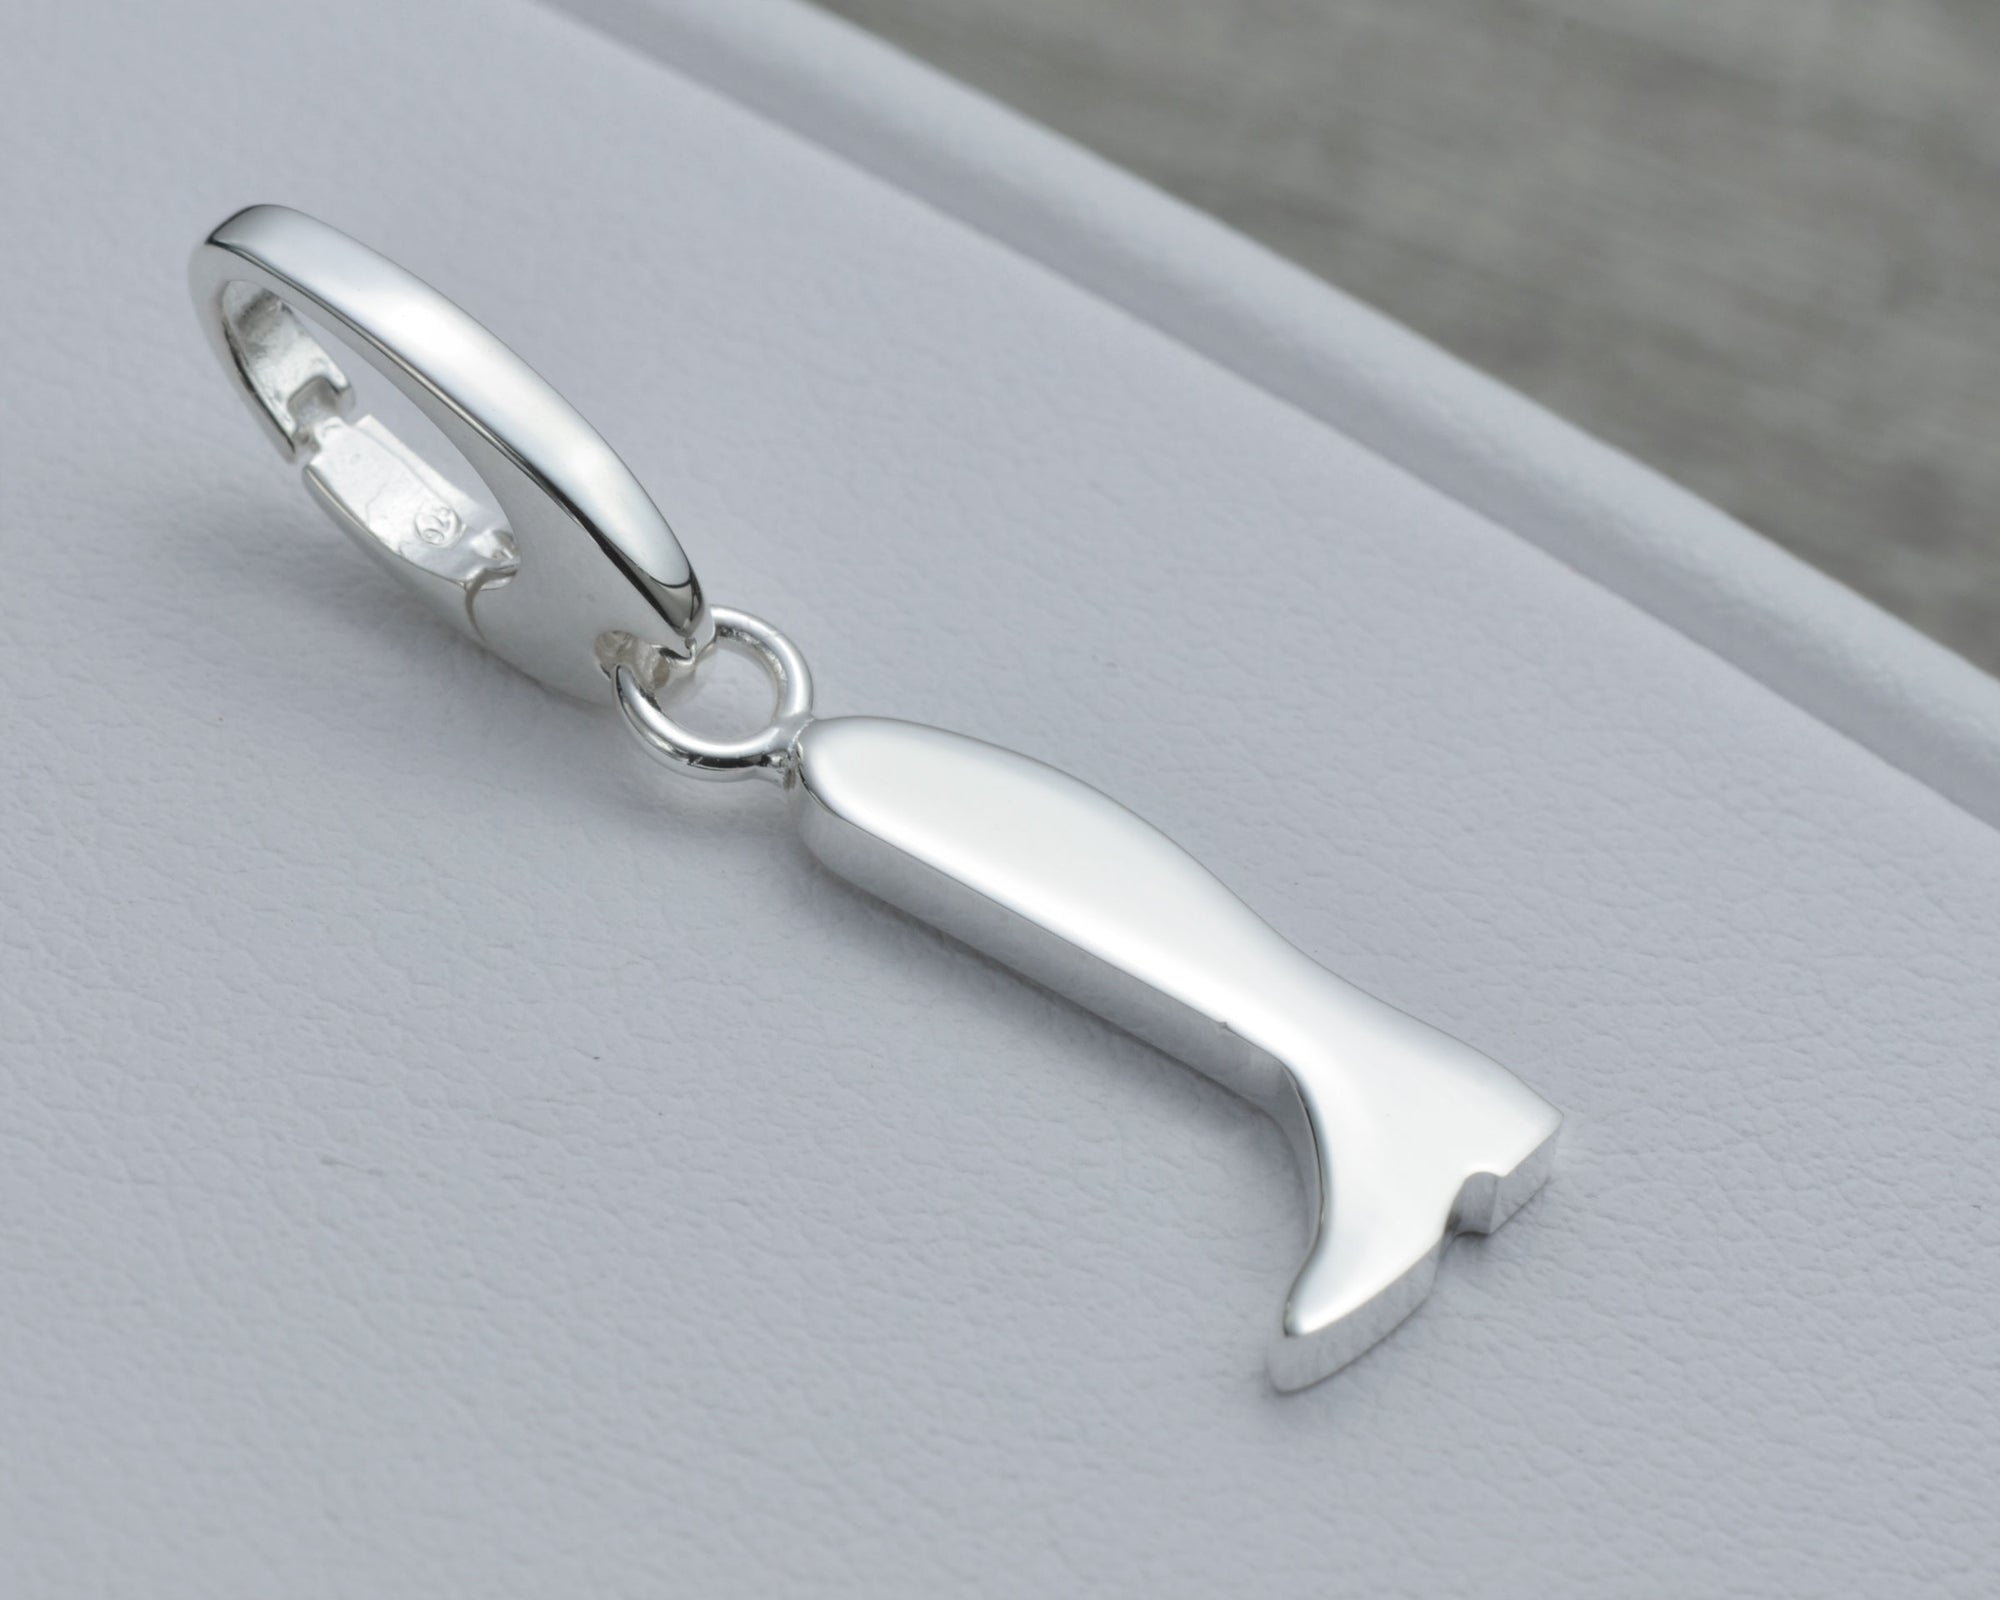 RIDING CHARM IN STERLING SILVER